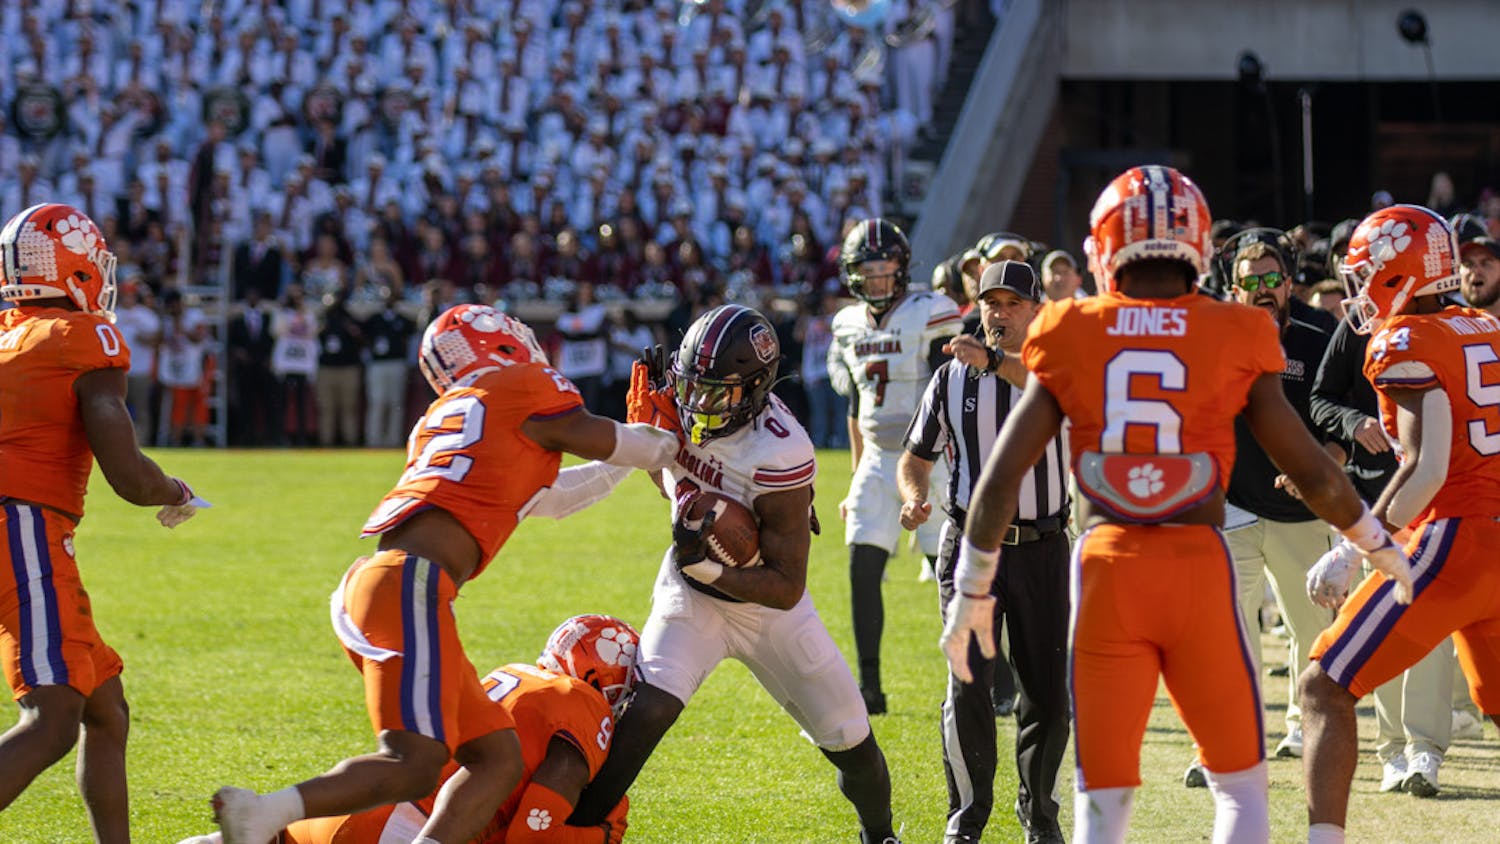 Junior tight end Jaheim Bell being pushed out of bounds by Clemson defense on Nov. 26, 2022 at Memorial Stadium. Bell rushed for a total of 29 yards during the game.